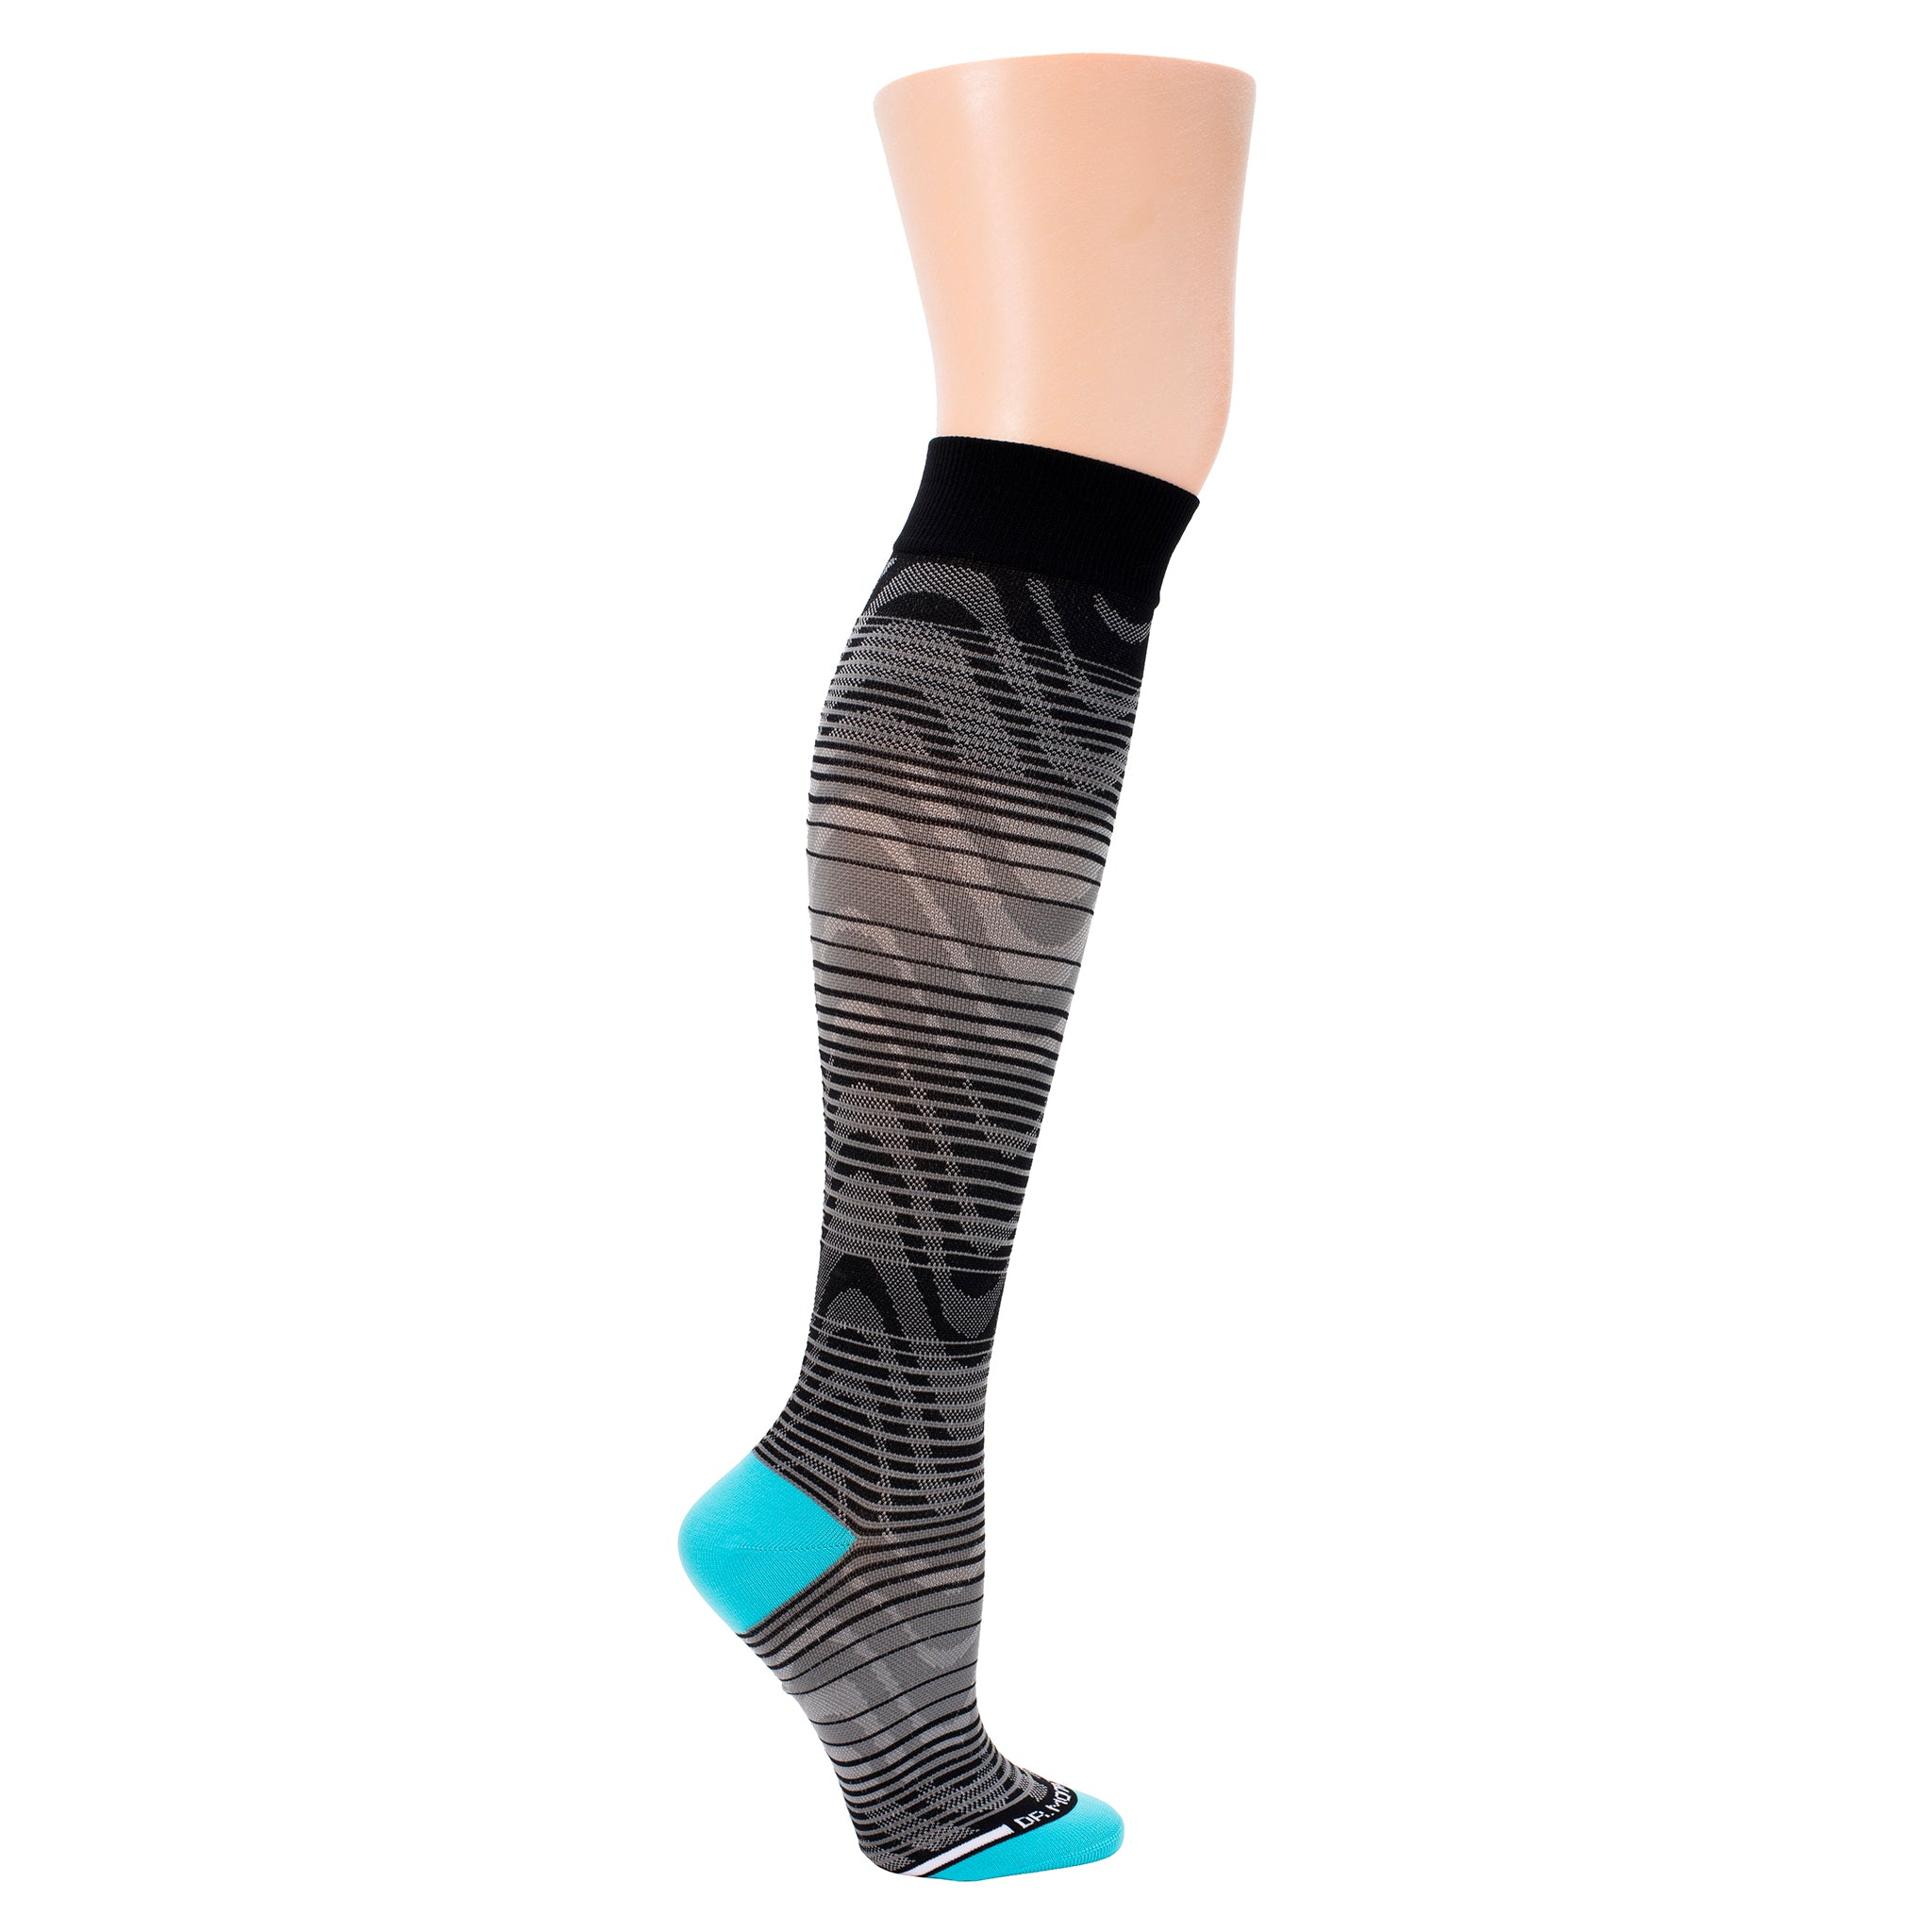  Athlemo 6Pairs Cotton Compression Socks for Men & Women  Circulation 8-15mmHg Knee High Socks : Clothing, Shoes & Jewelry